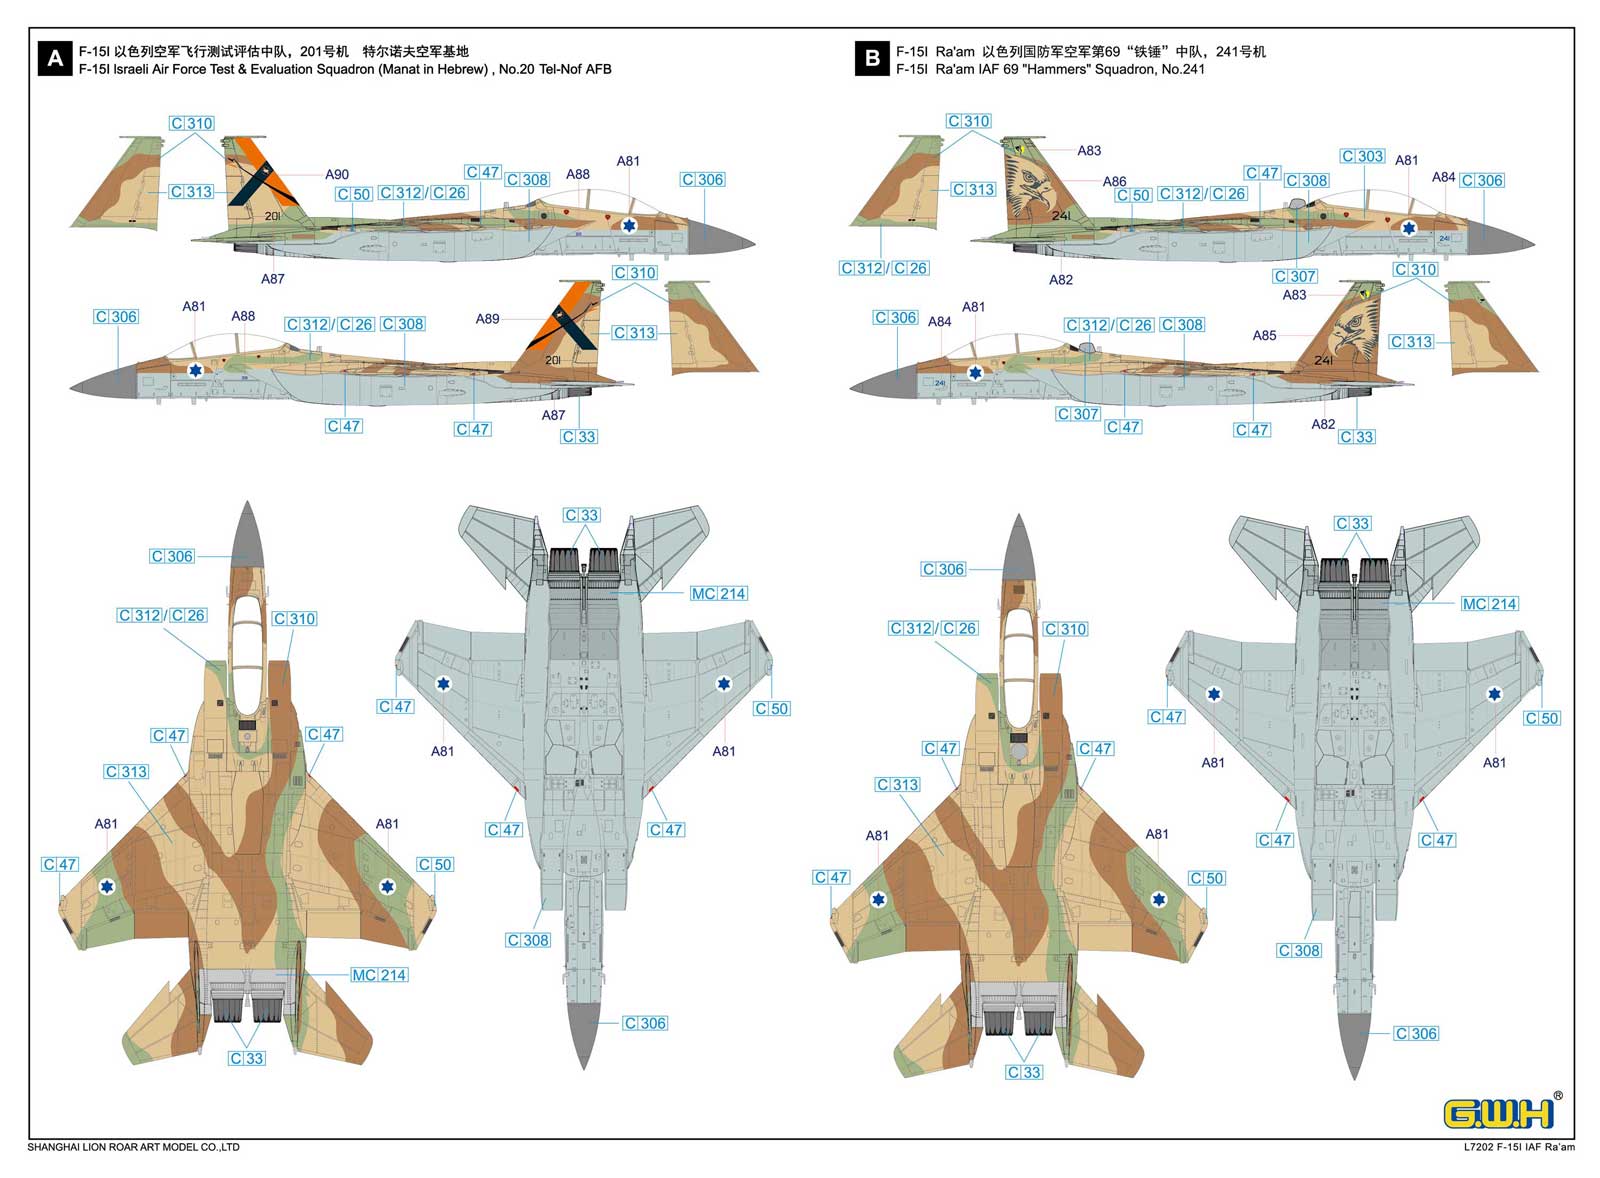 Great Wall Hobby L7202 1/72 Scale Israeli Air Force F-15i IAF Ra'am Model Kit for sale online 